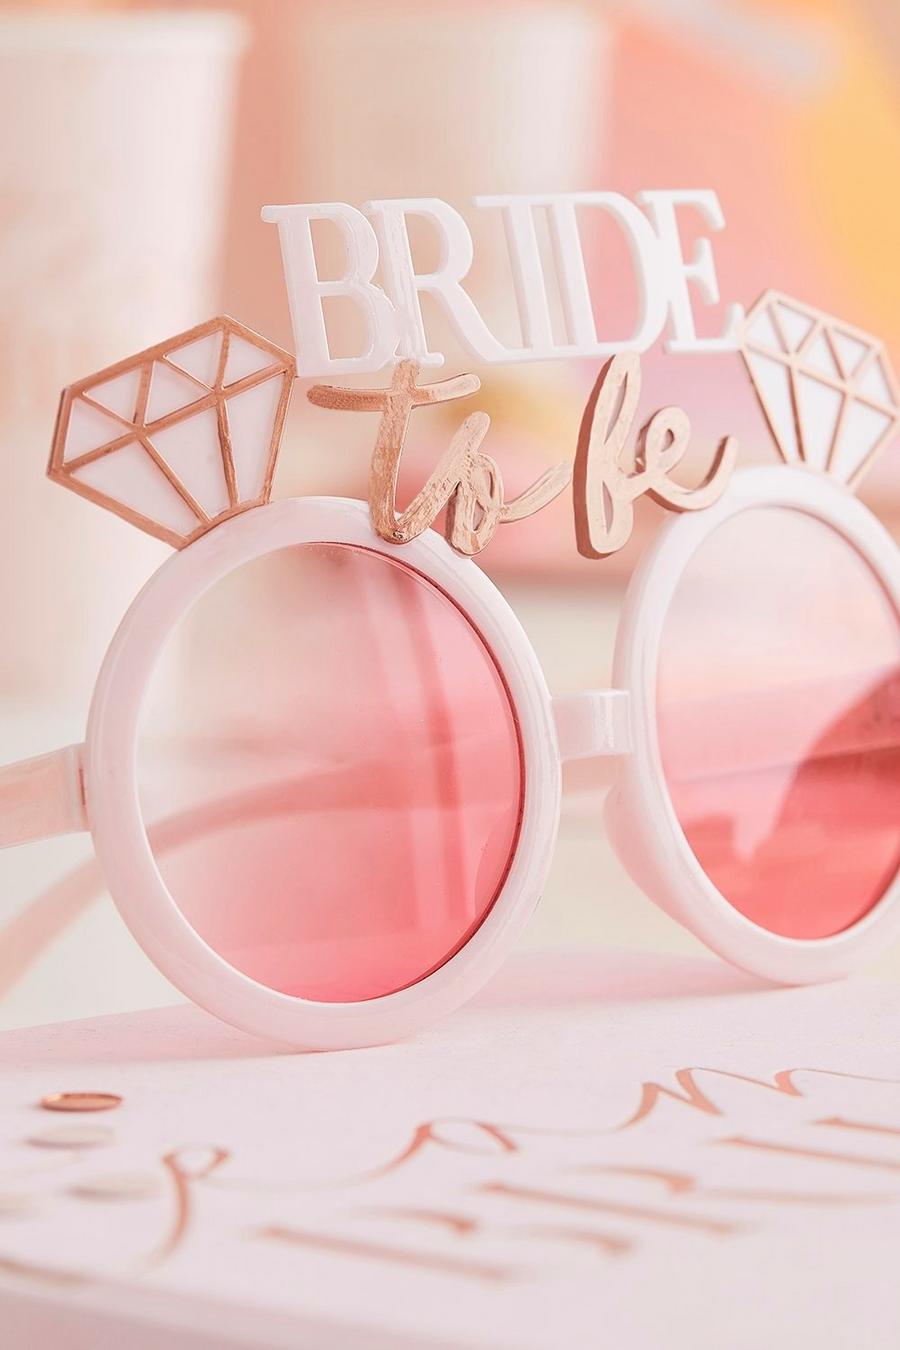 Gafas Bride To Be de Ginger Ray, Pink rosa